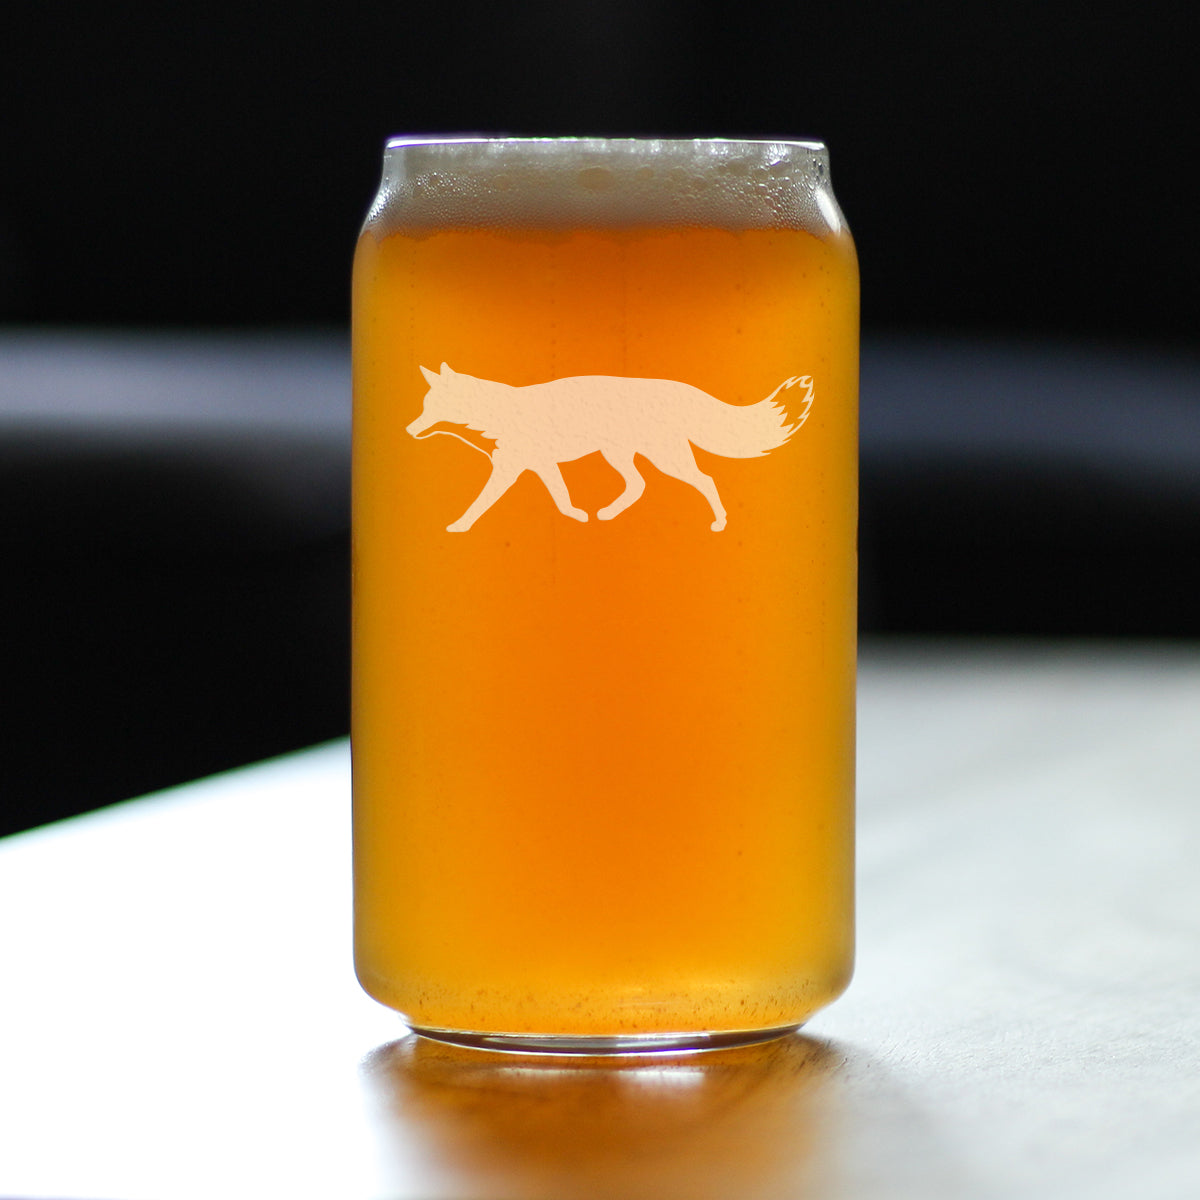 Fox Silhouette Beer Can Pint Glass - Cabin Themed Fox Gifts or Rustic Fox Decor for Women and Men - 16 Oz Glasses